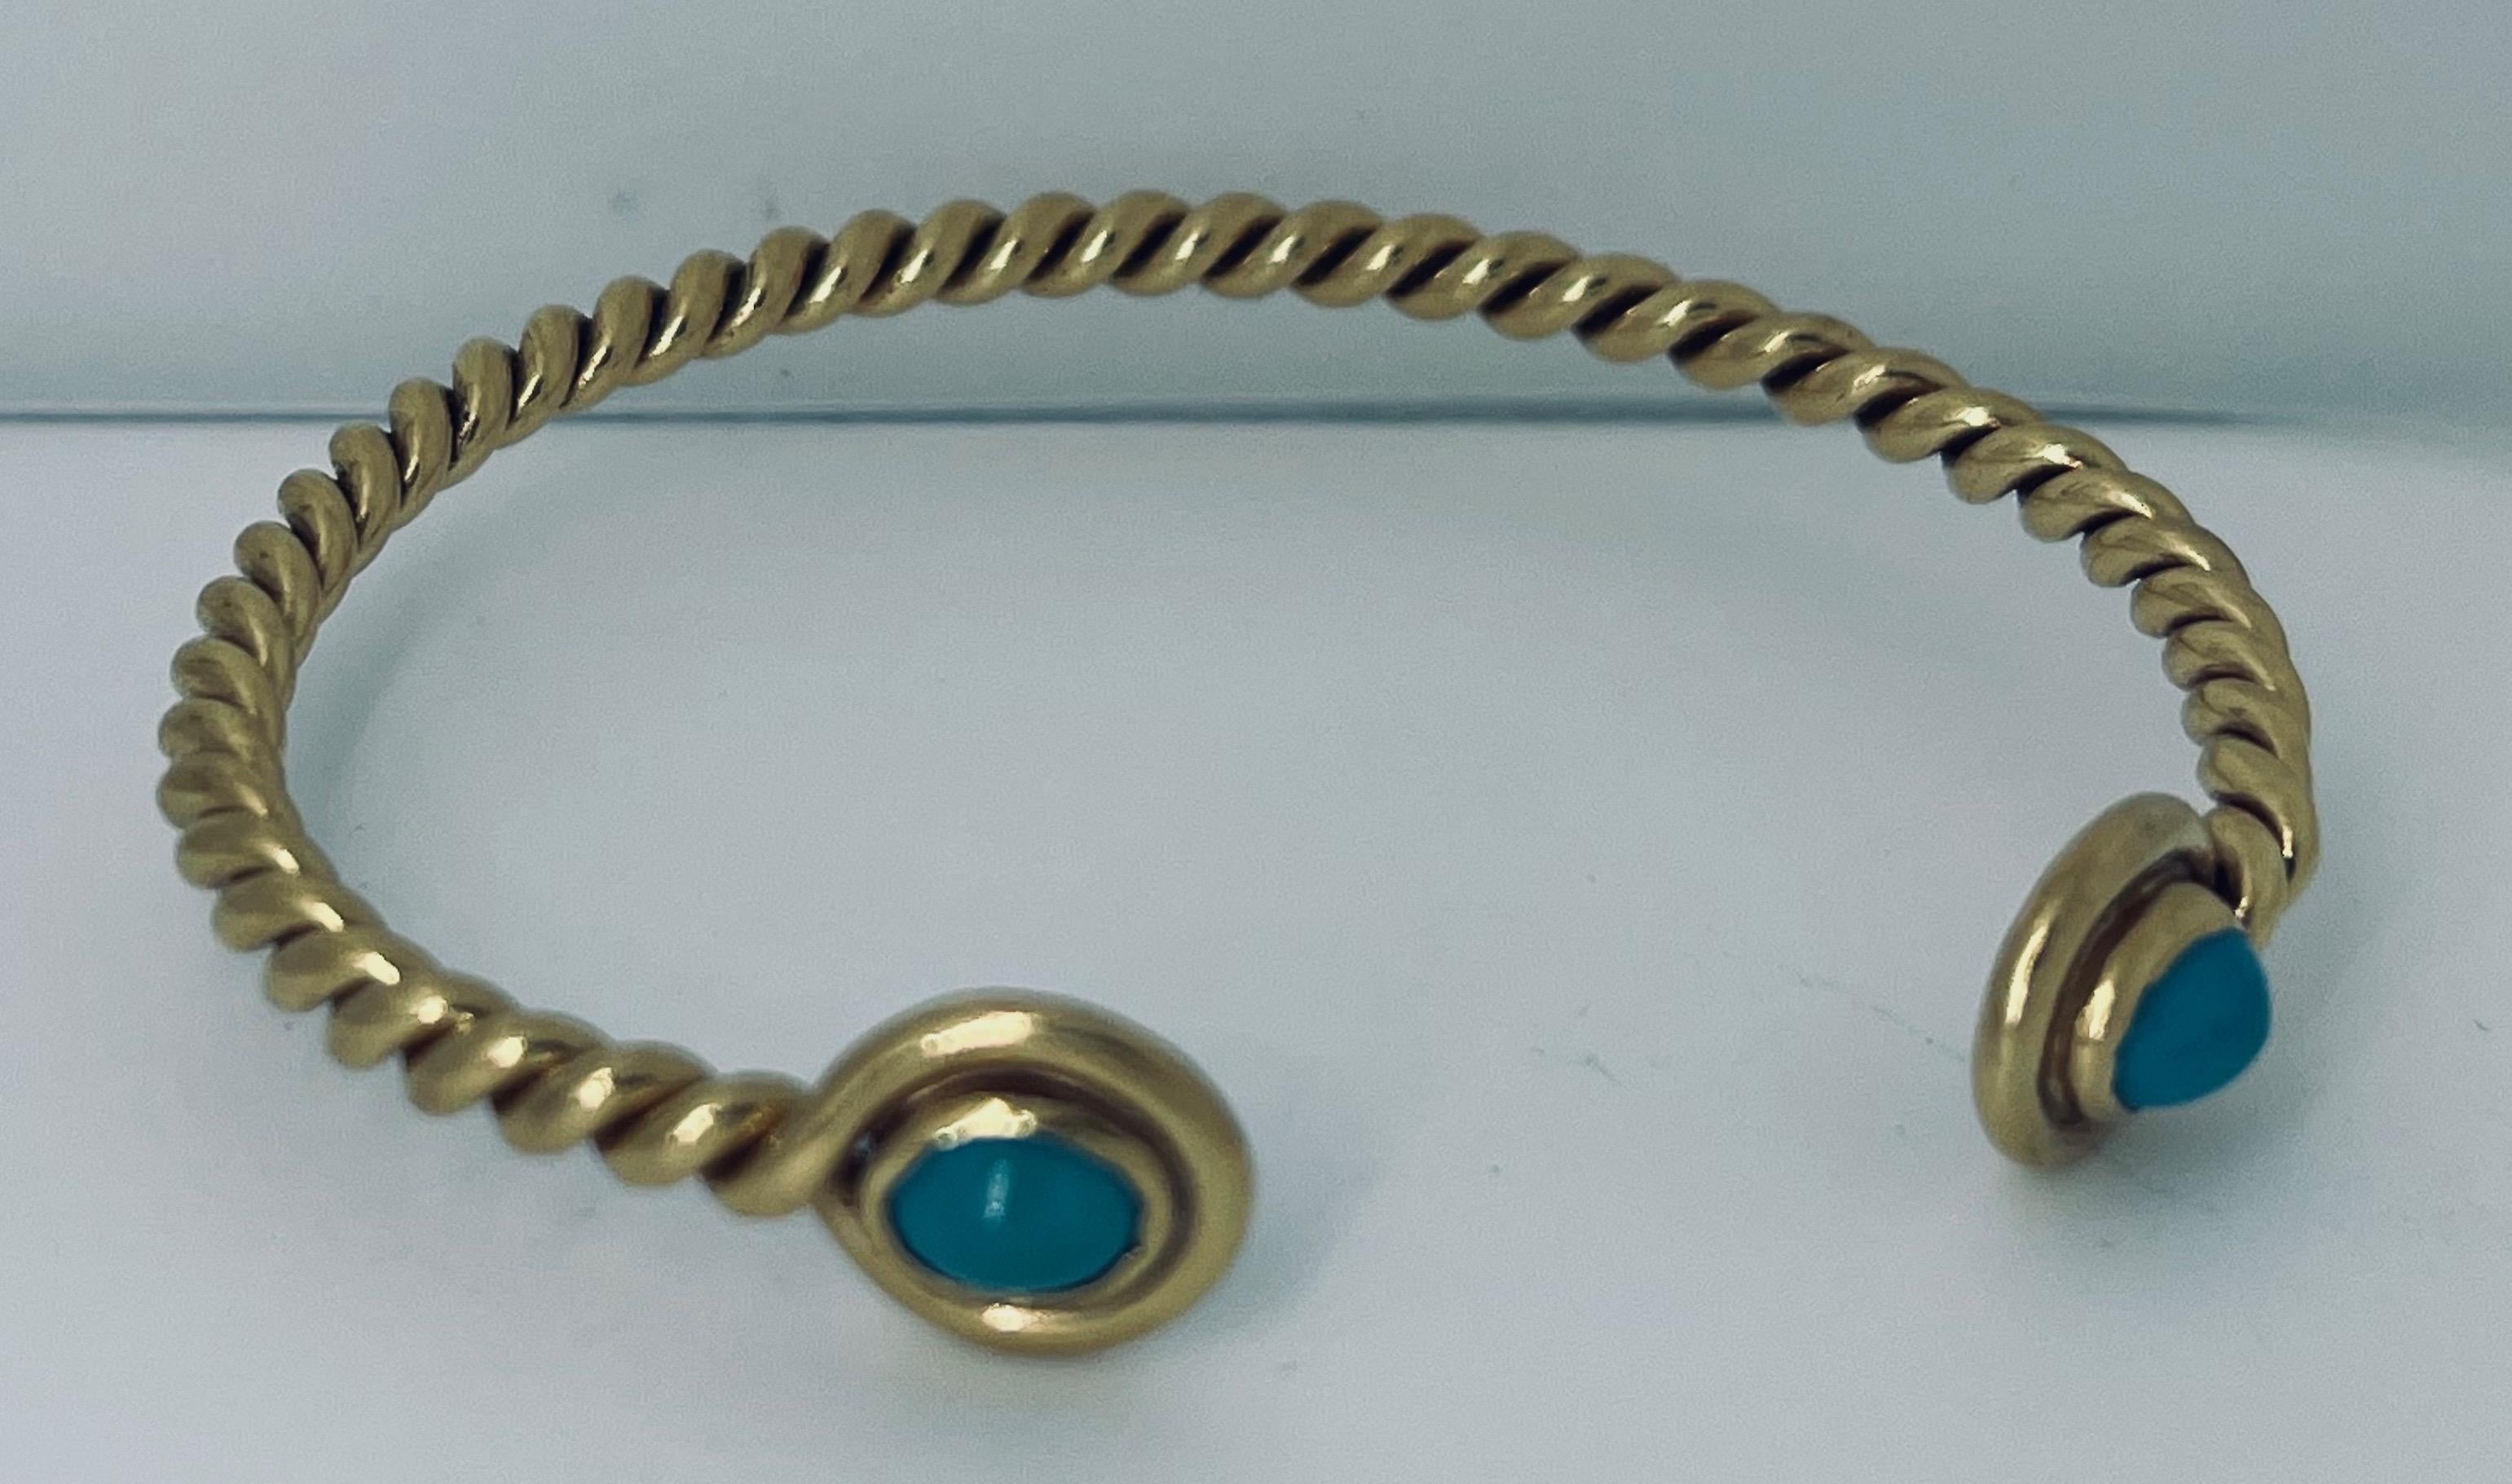 Marked 18ct gold and turquoise bracelet/ bangle, circa 1970s, 15.3 grammes, 5cm diameter, 16cm circumference of the bangle, 2cm opening, 3.5mm thickness of twisted wire, stones are 4.5mm x 6mm. Unbranded, made in Italy. Hallmark: stamped 18ct.